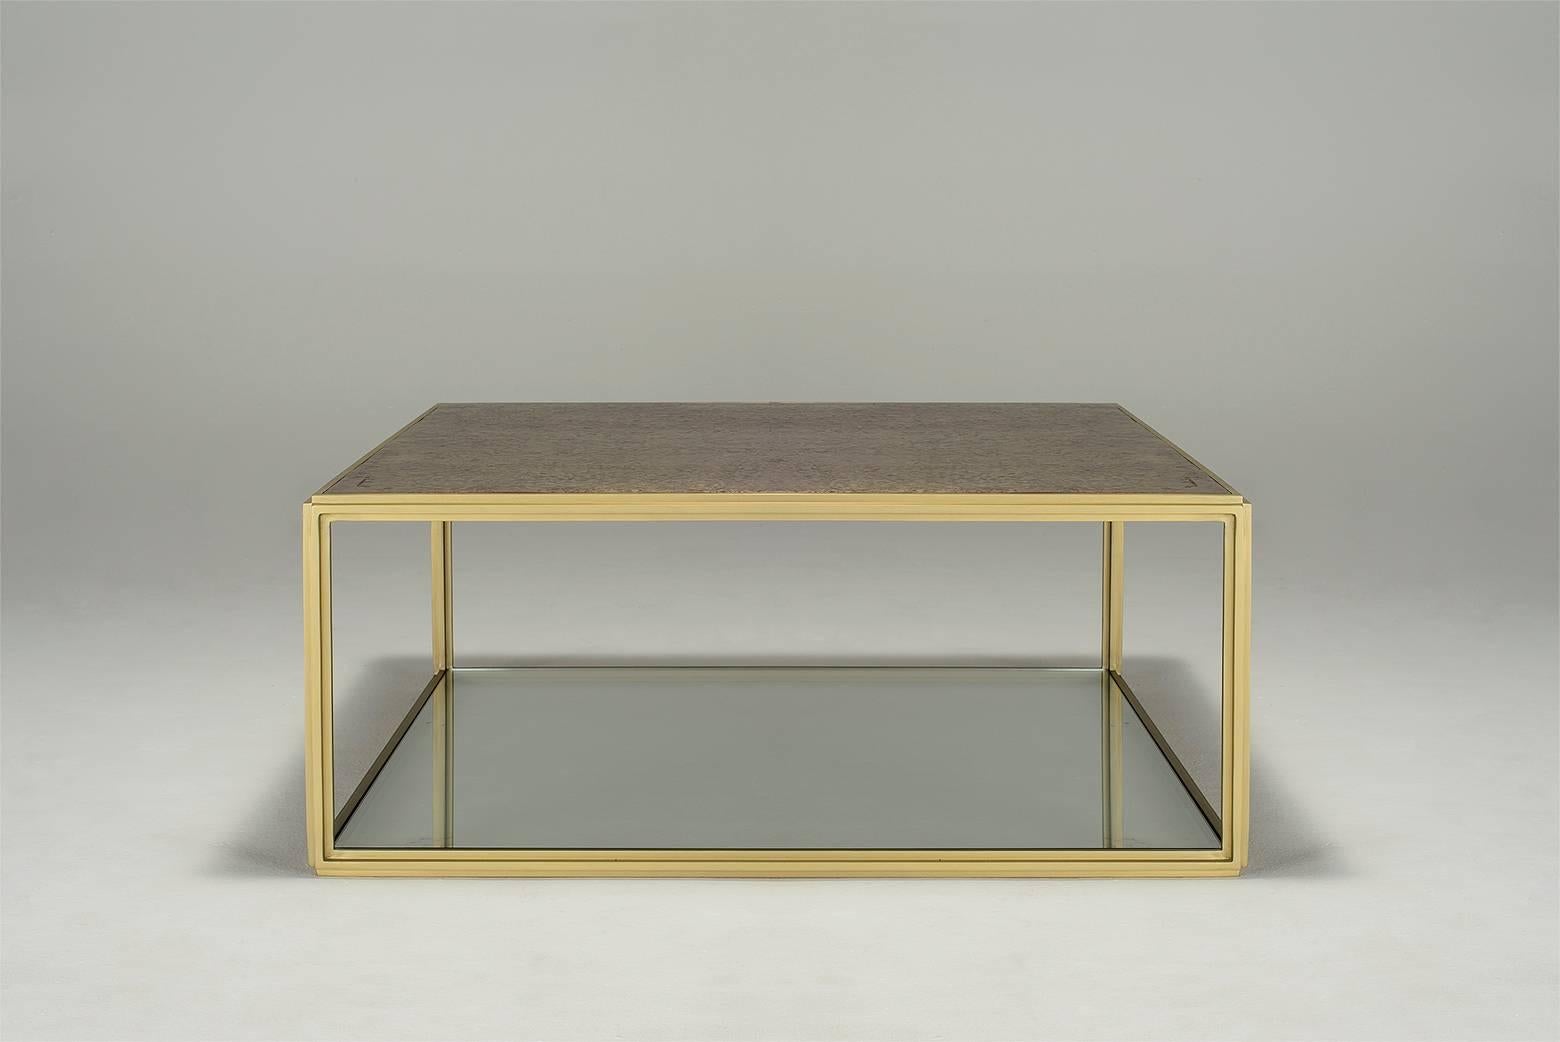 Minimalist Cubist Bronze and Brass Occasional Square Table, PT6 Model, by P. Tendercool For Sale